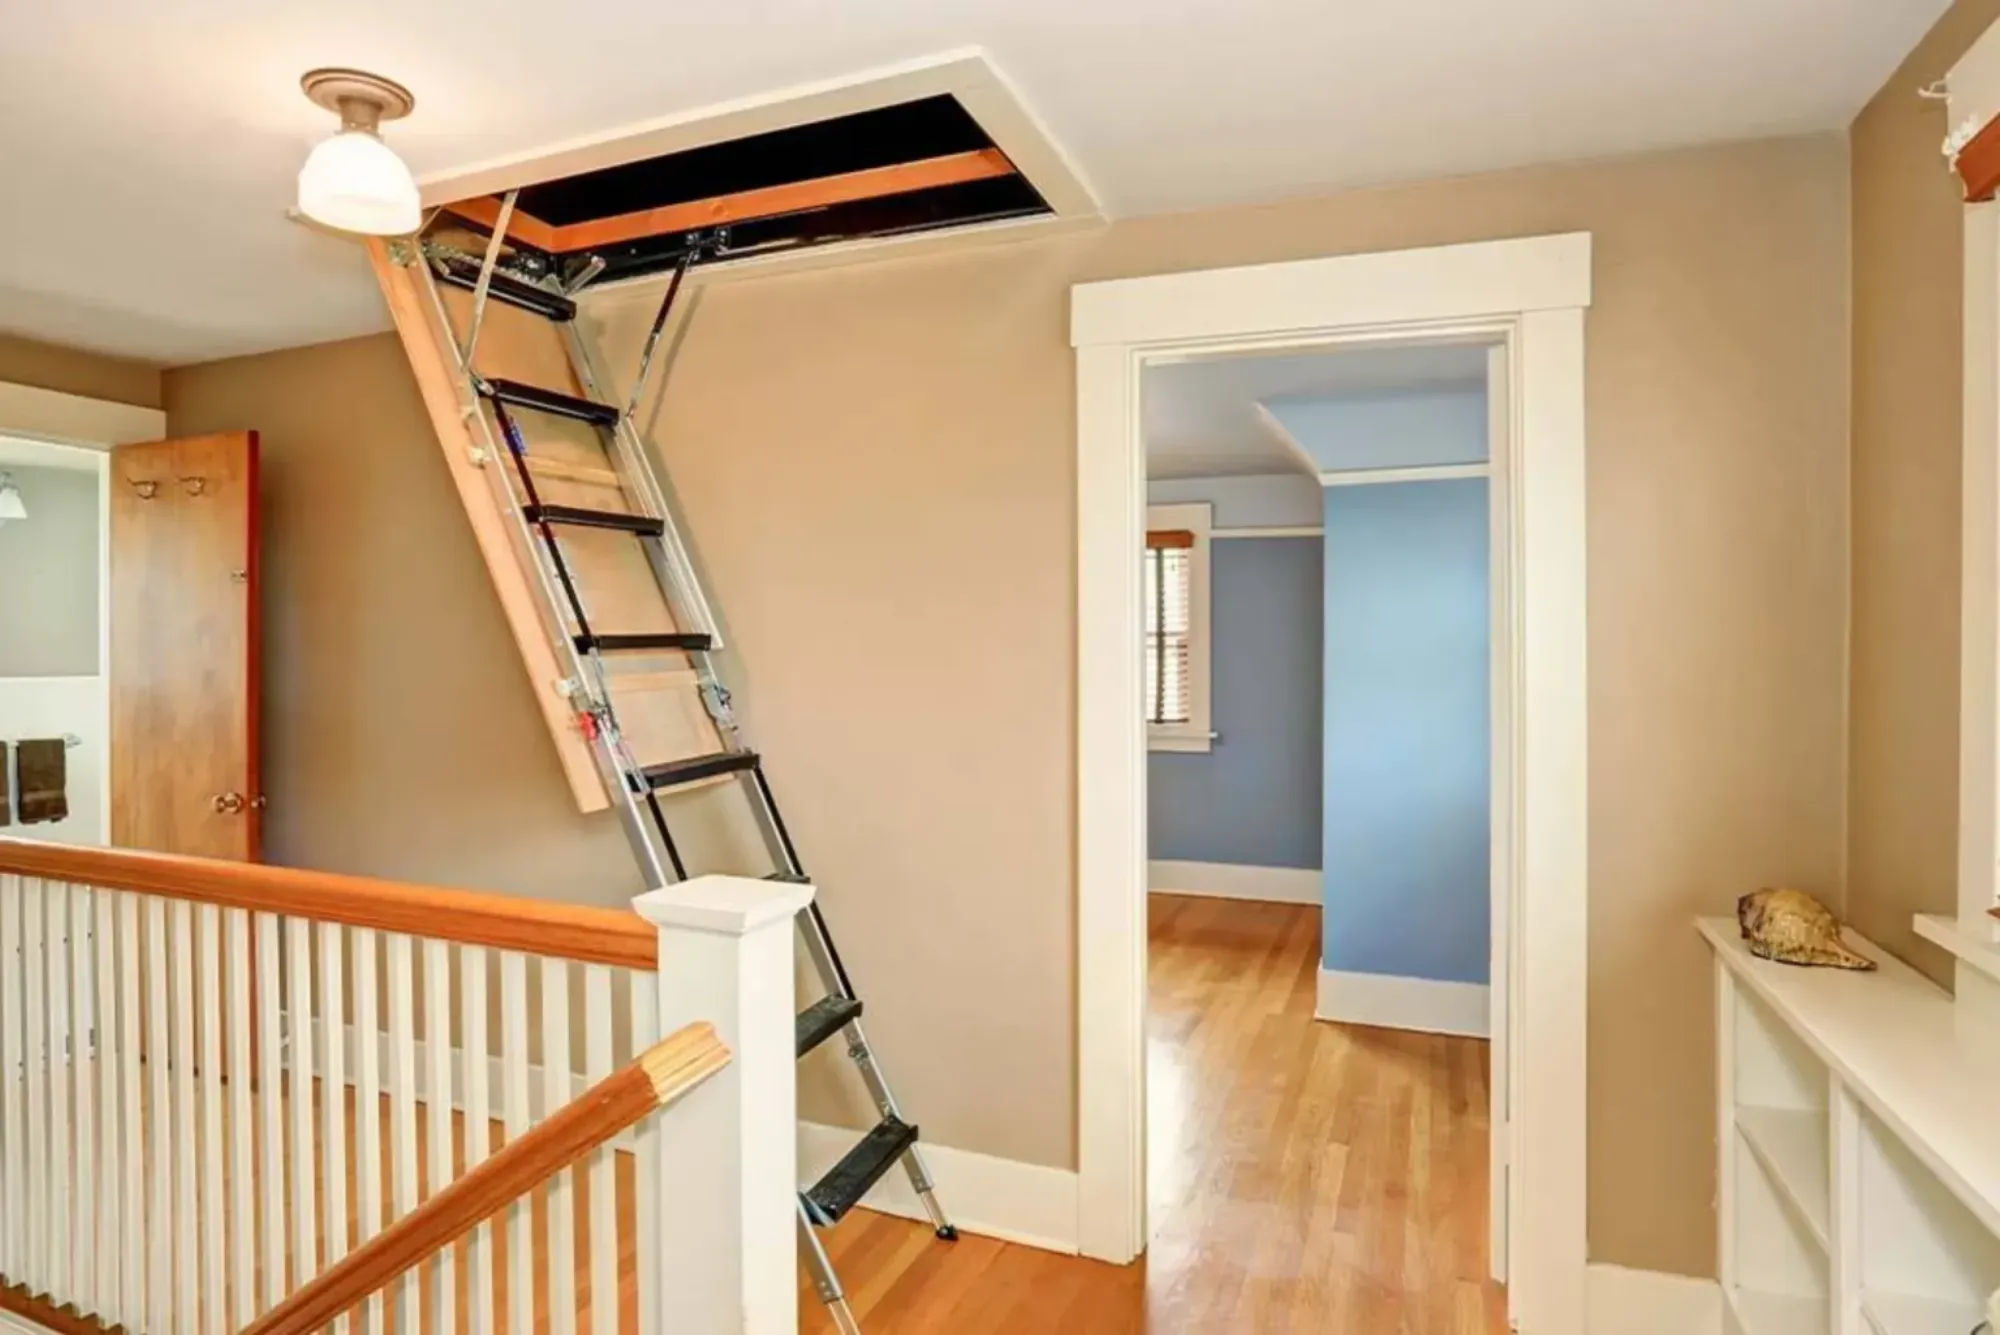 What Types of Loft Boarding Leicester are available